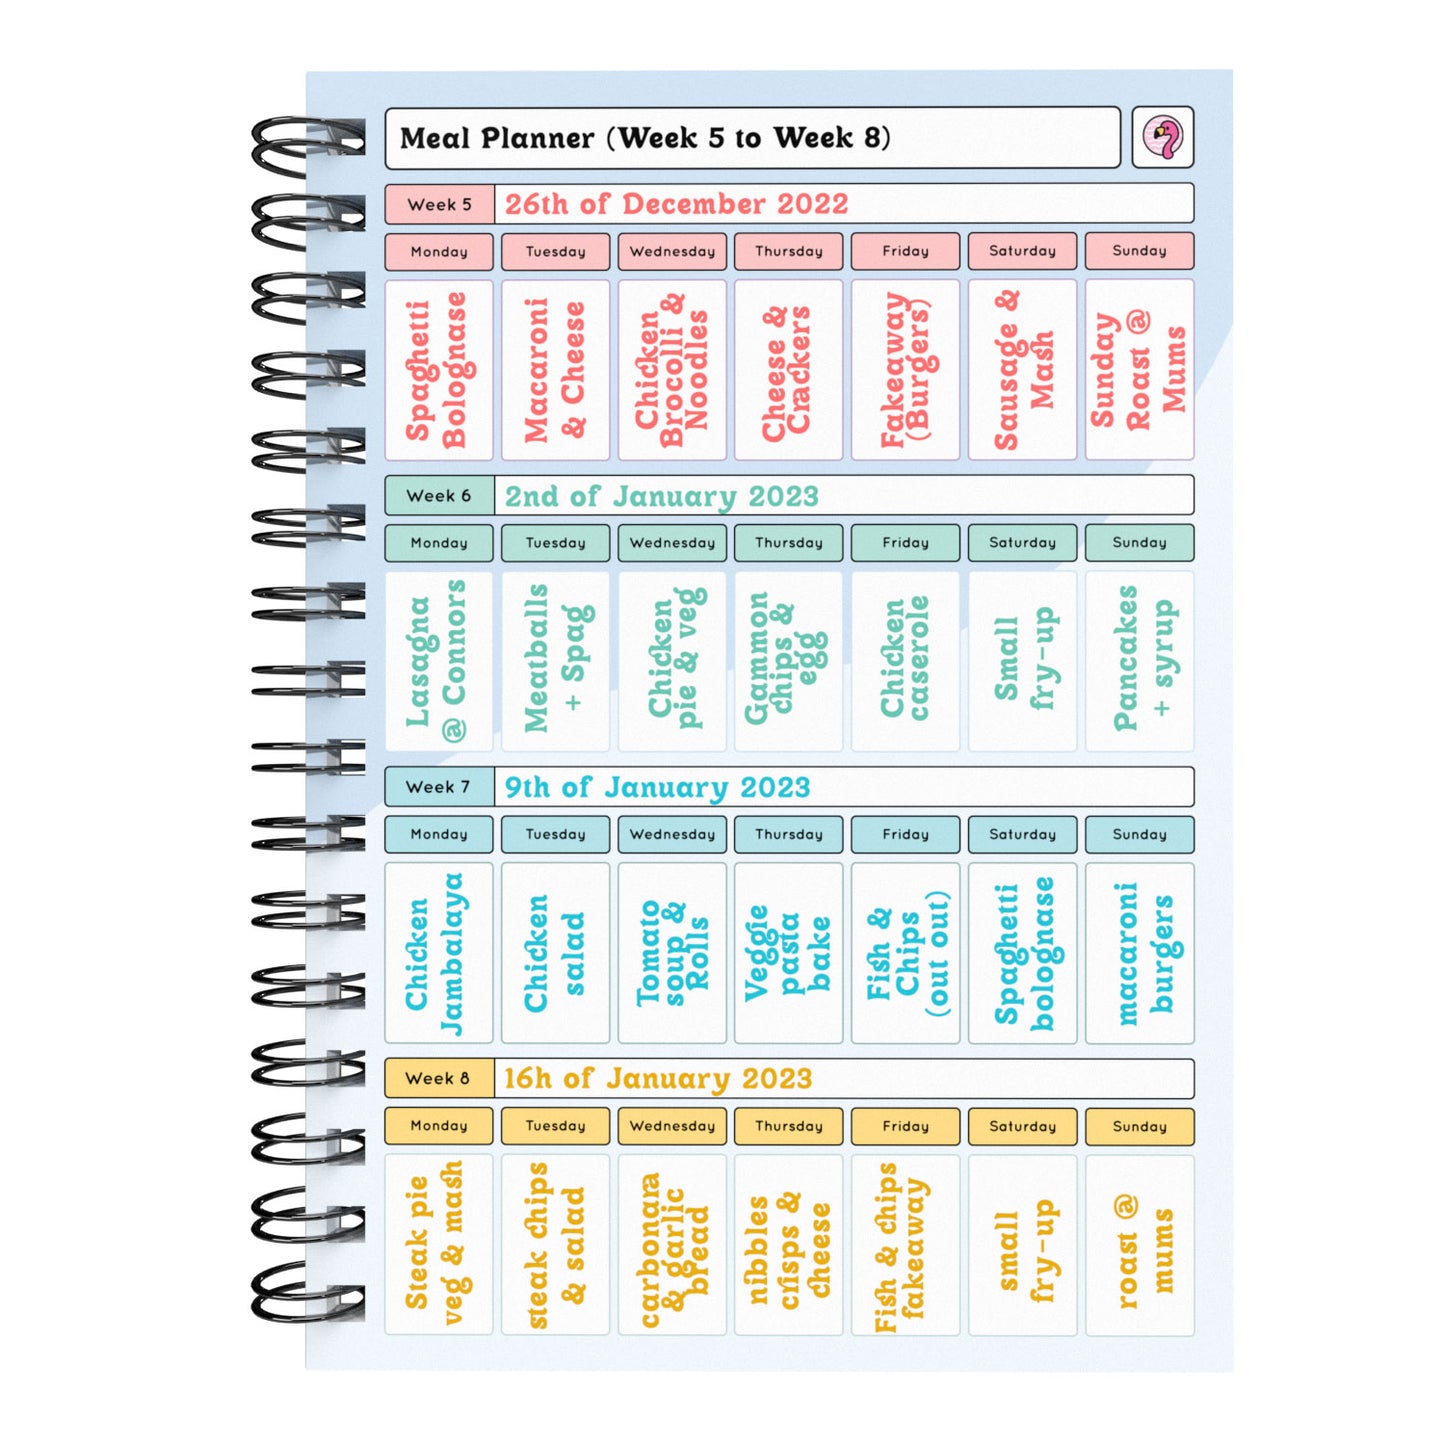 Food Diary - C69 - Calorie Counting